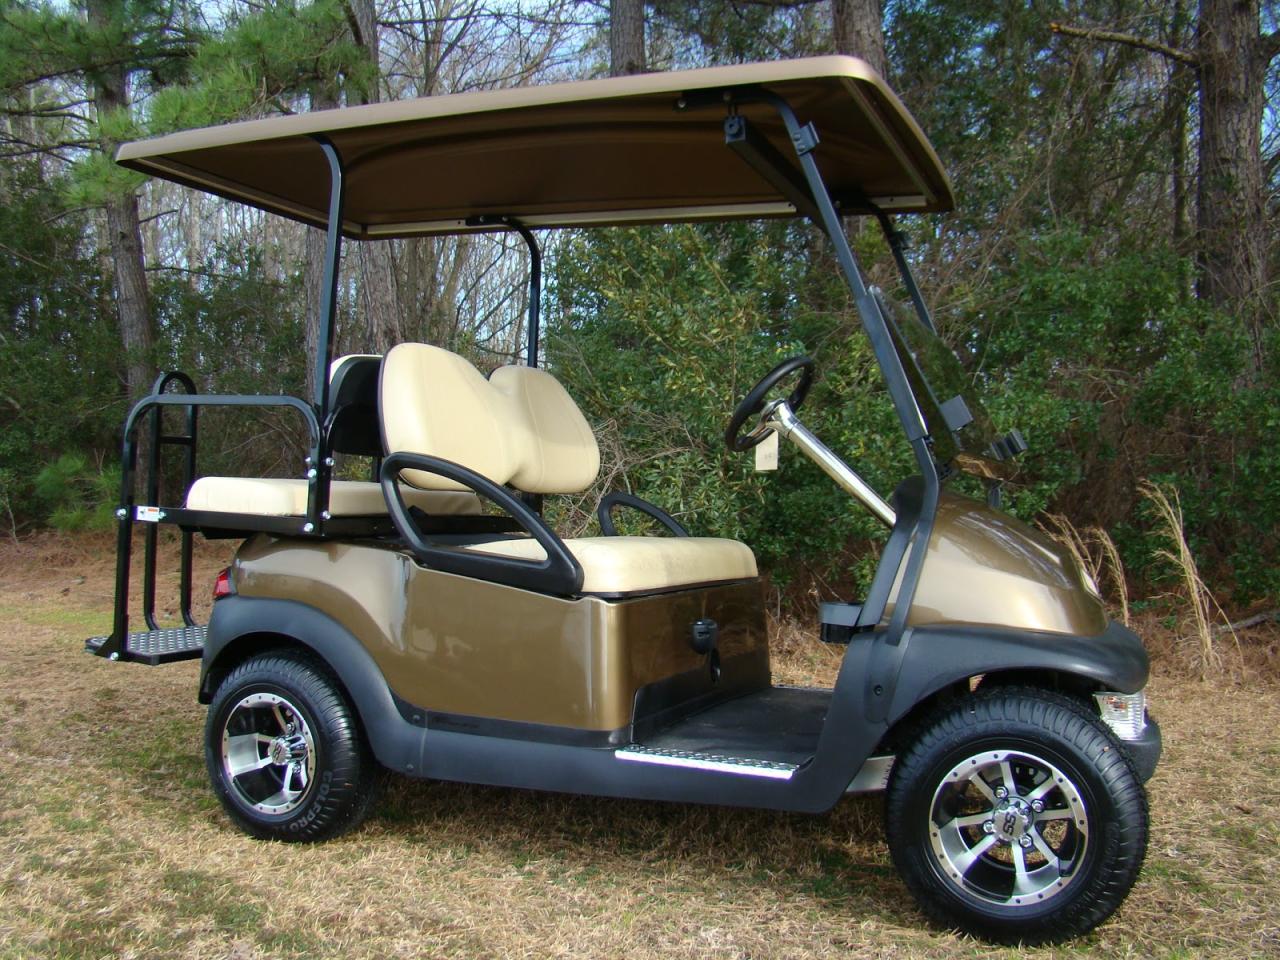 Discover the Ultimate Golfing Experience: Used Golf Carts for Sale by Owner in Polk, Texas